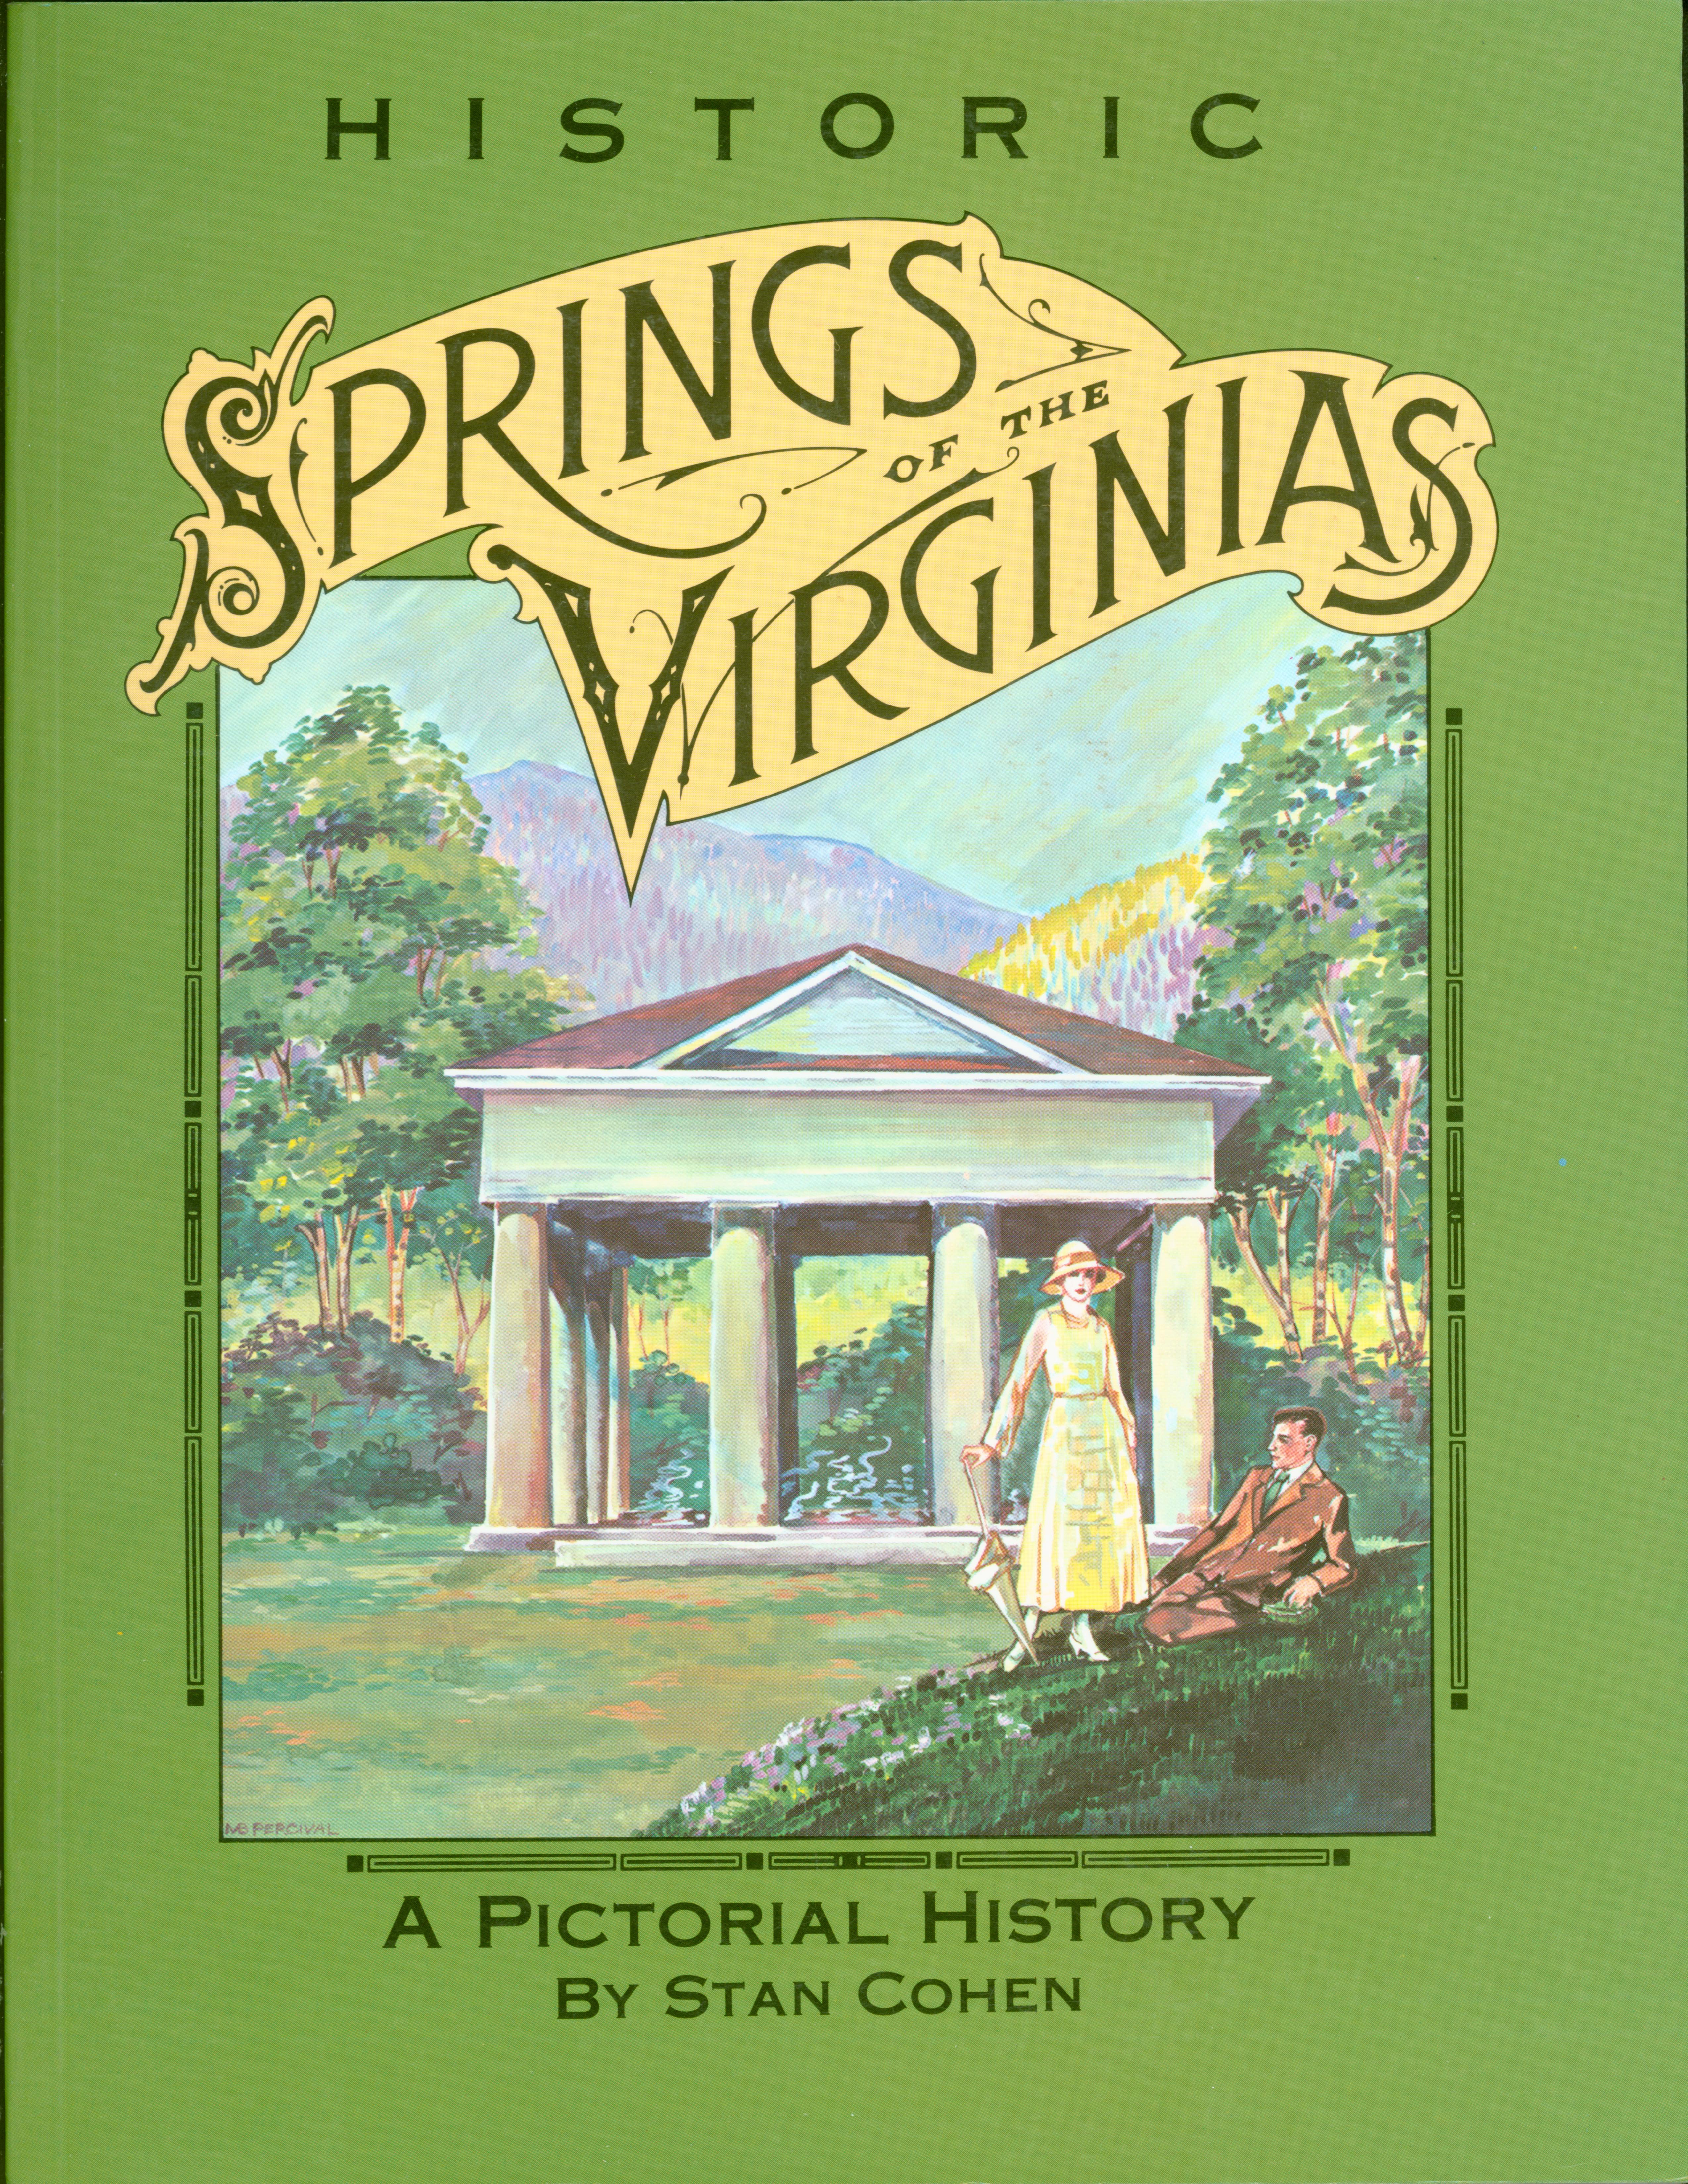 HISTORIC SPRINGS OF THE VIRGINIAS: a pictorial history. 